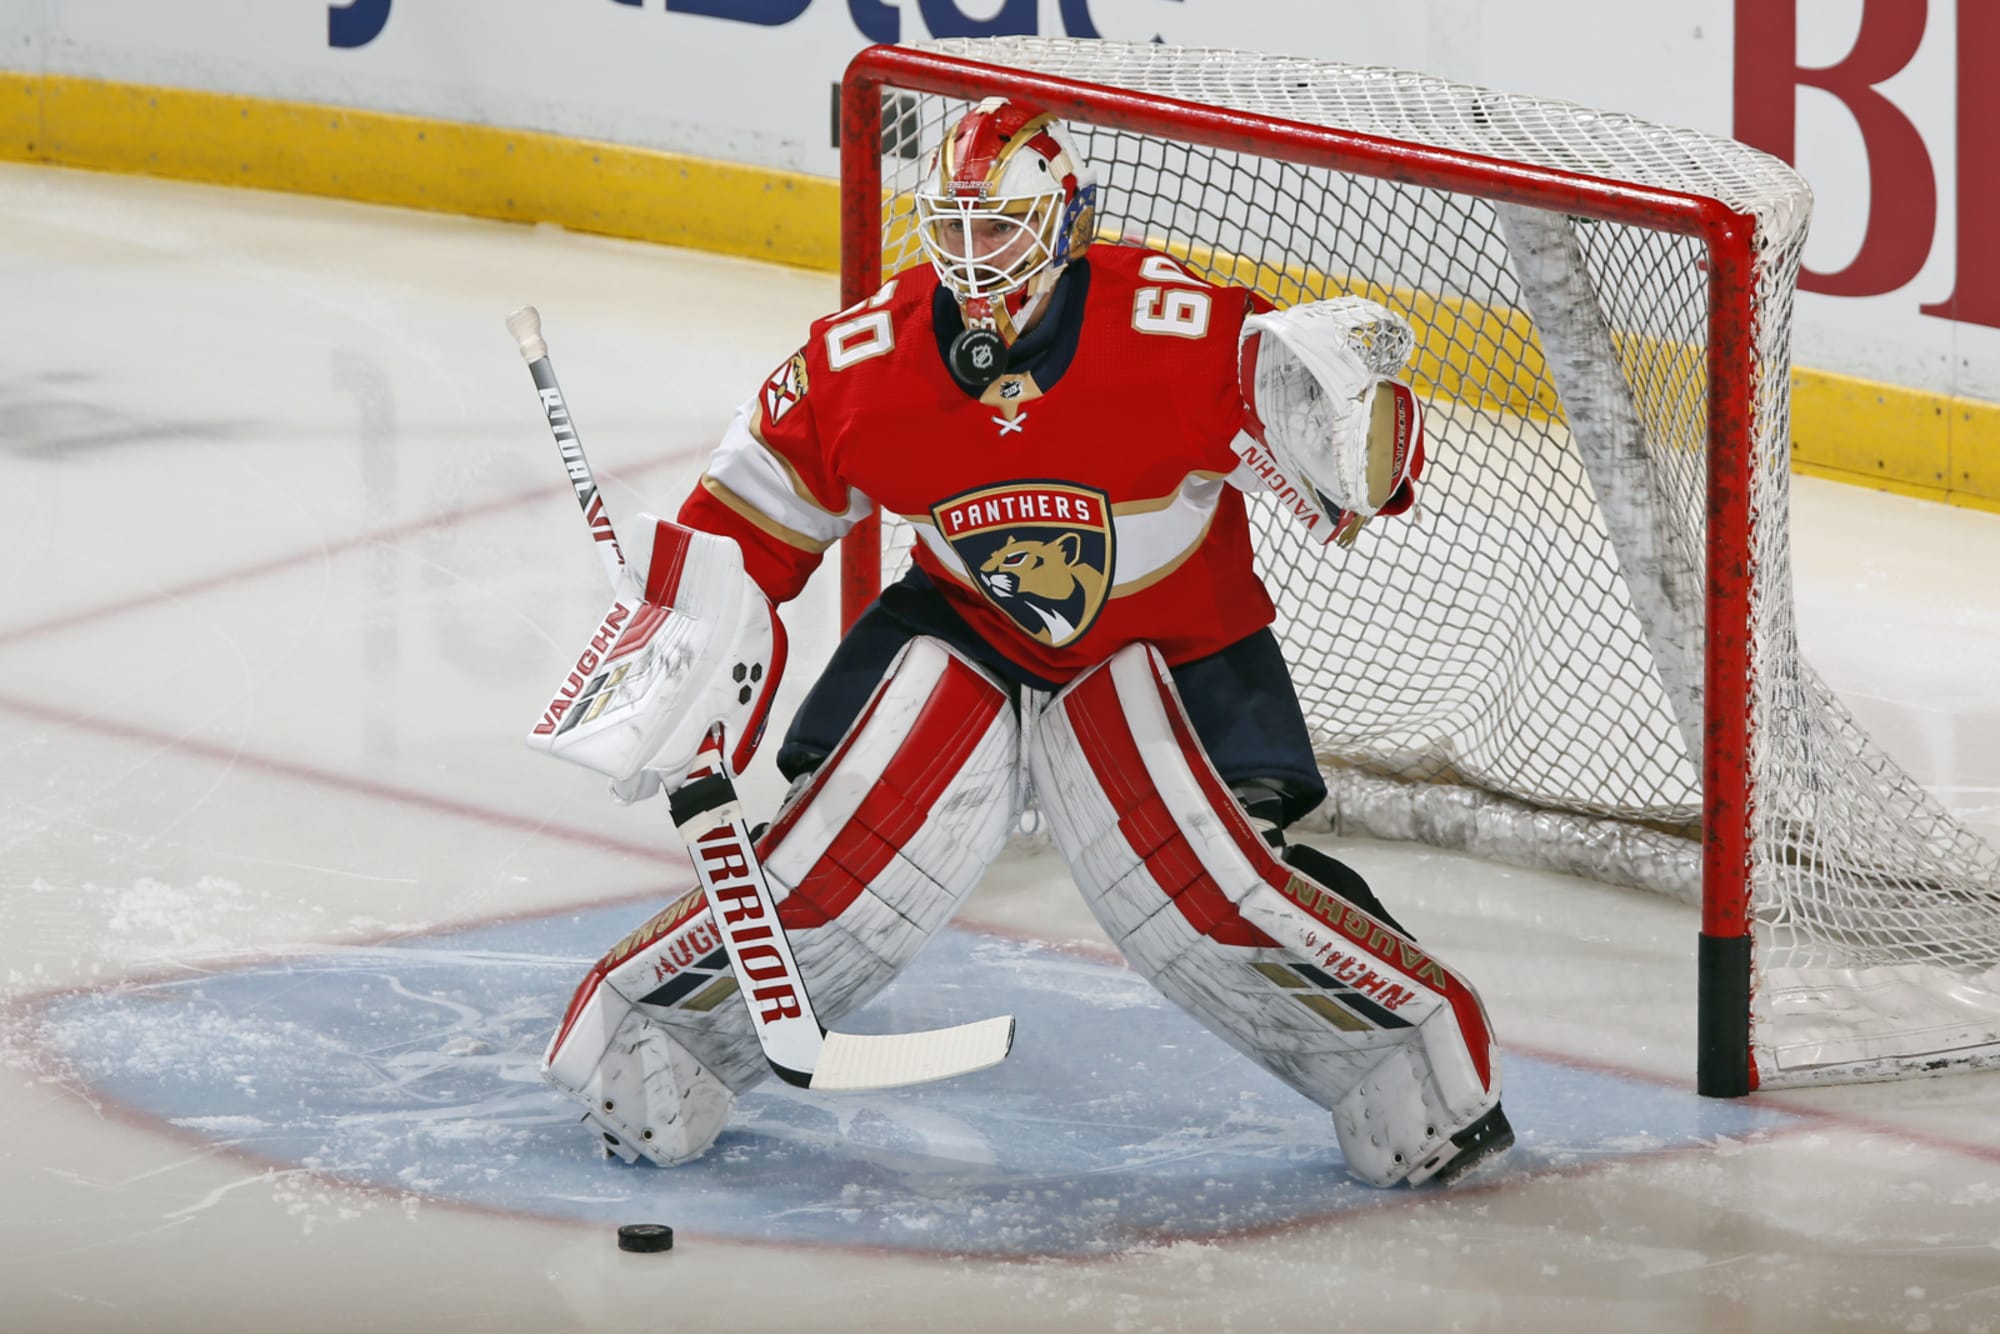 Chris Driedger will start Game 2 for the Florida Panthers - Daily